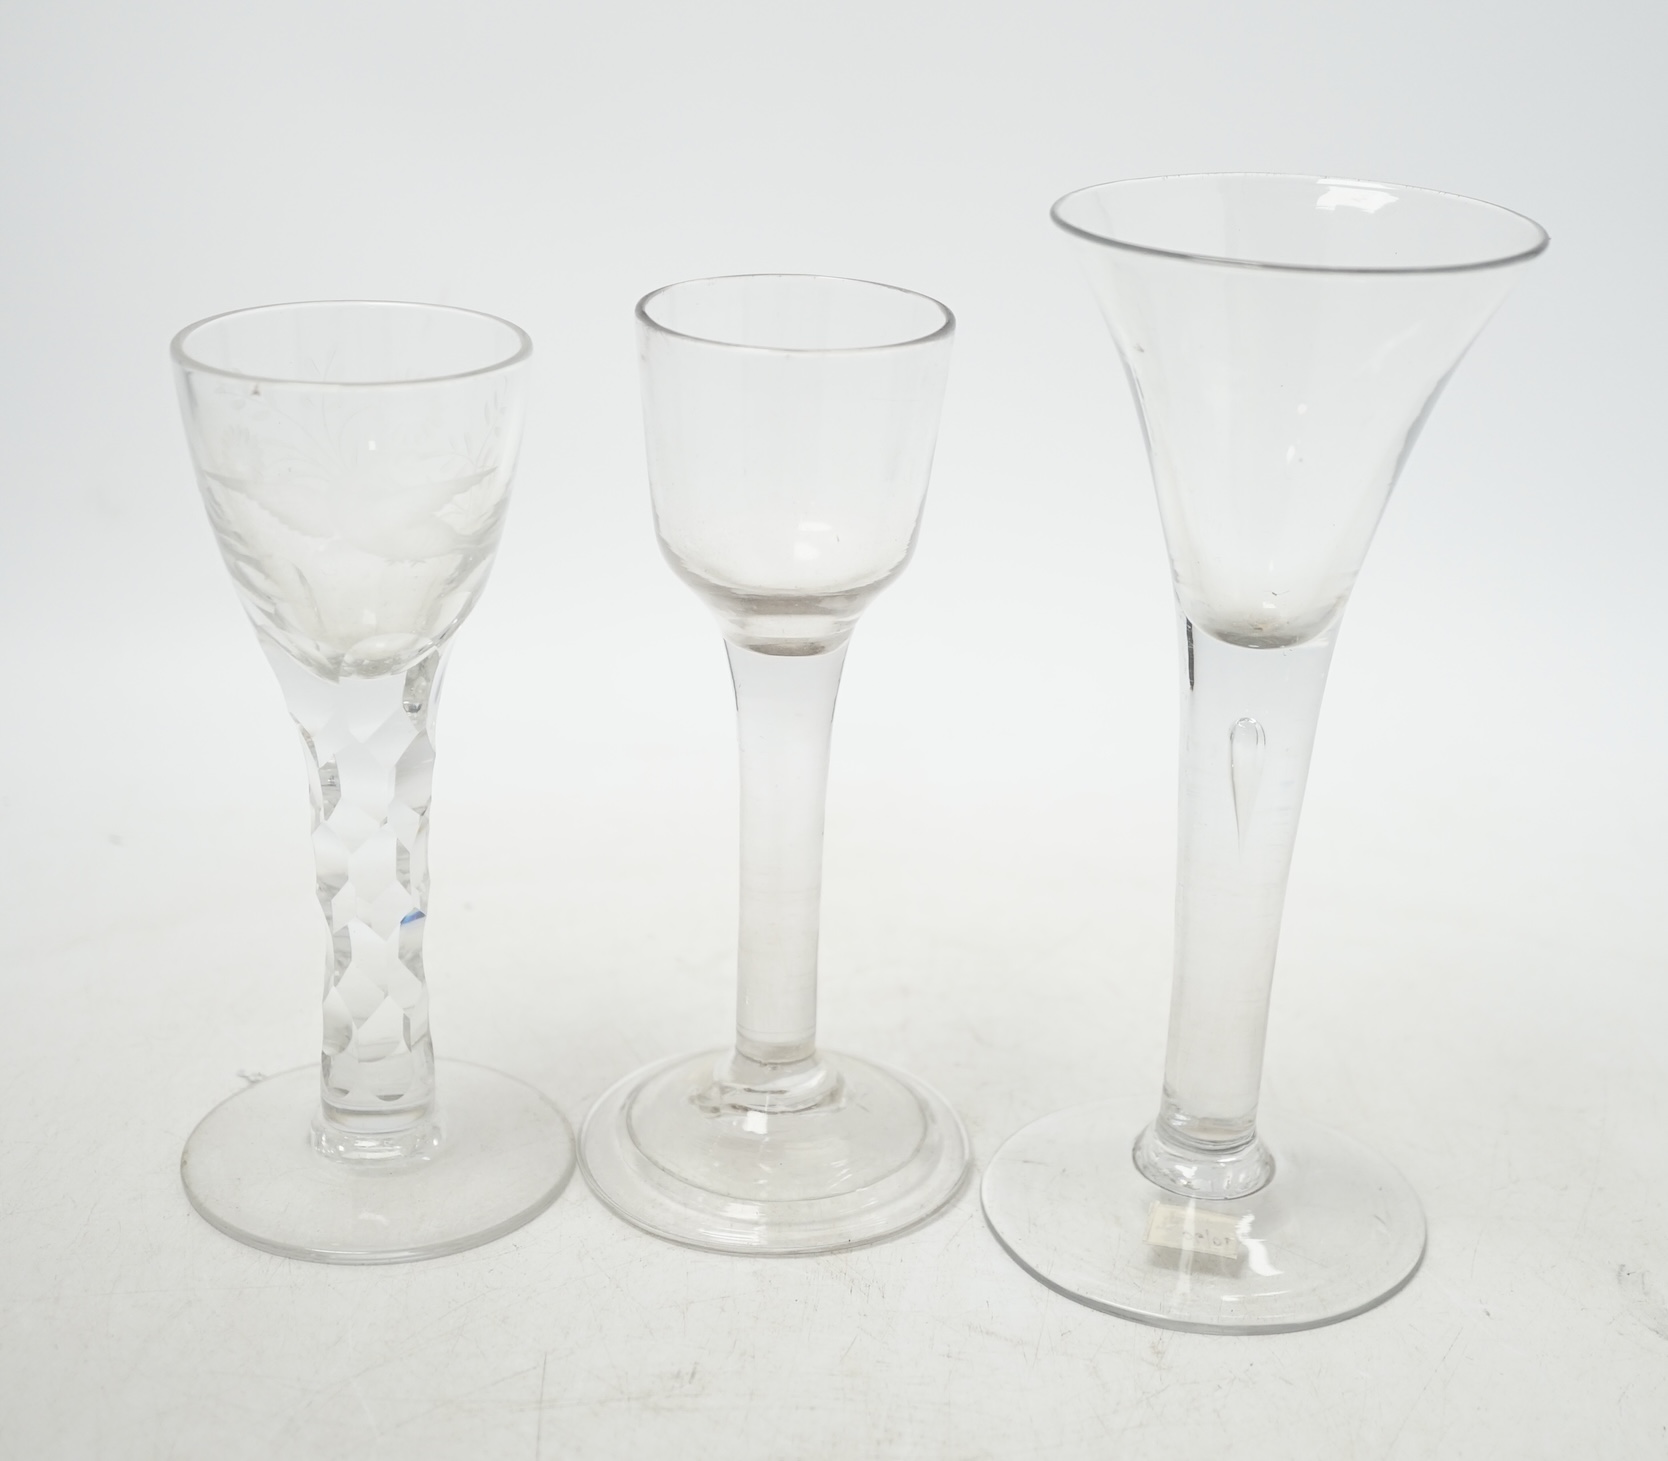 Three 18th century wine glasses; a drawn trumpet glass, another with a bell shaped bowl and folded foot and an engraved glass with a faceted stem, tallest 16.5cm. Condition - good